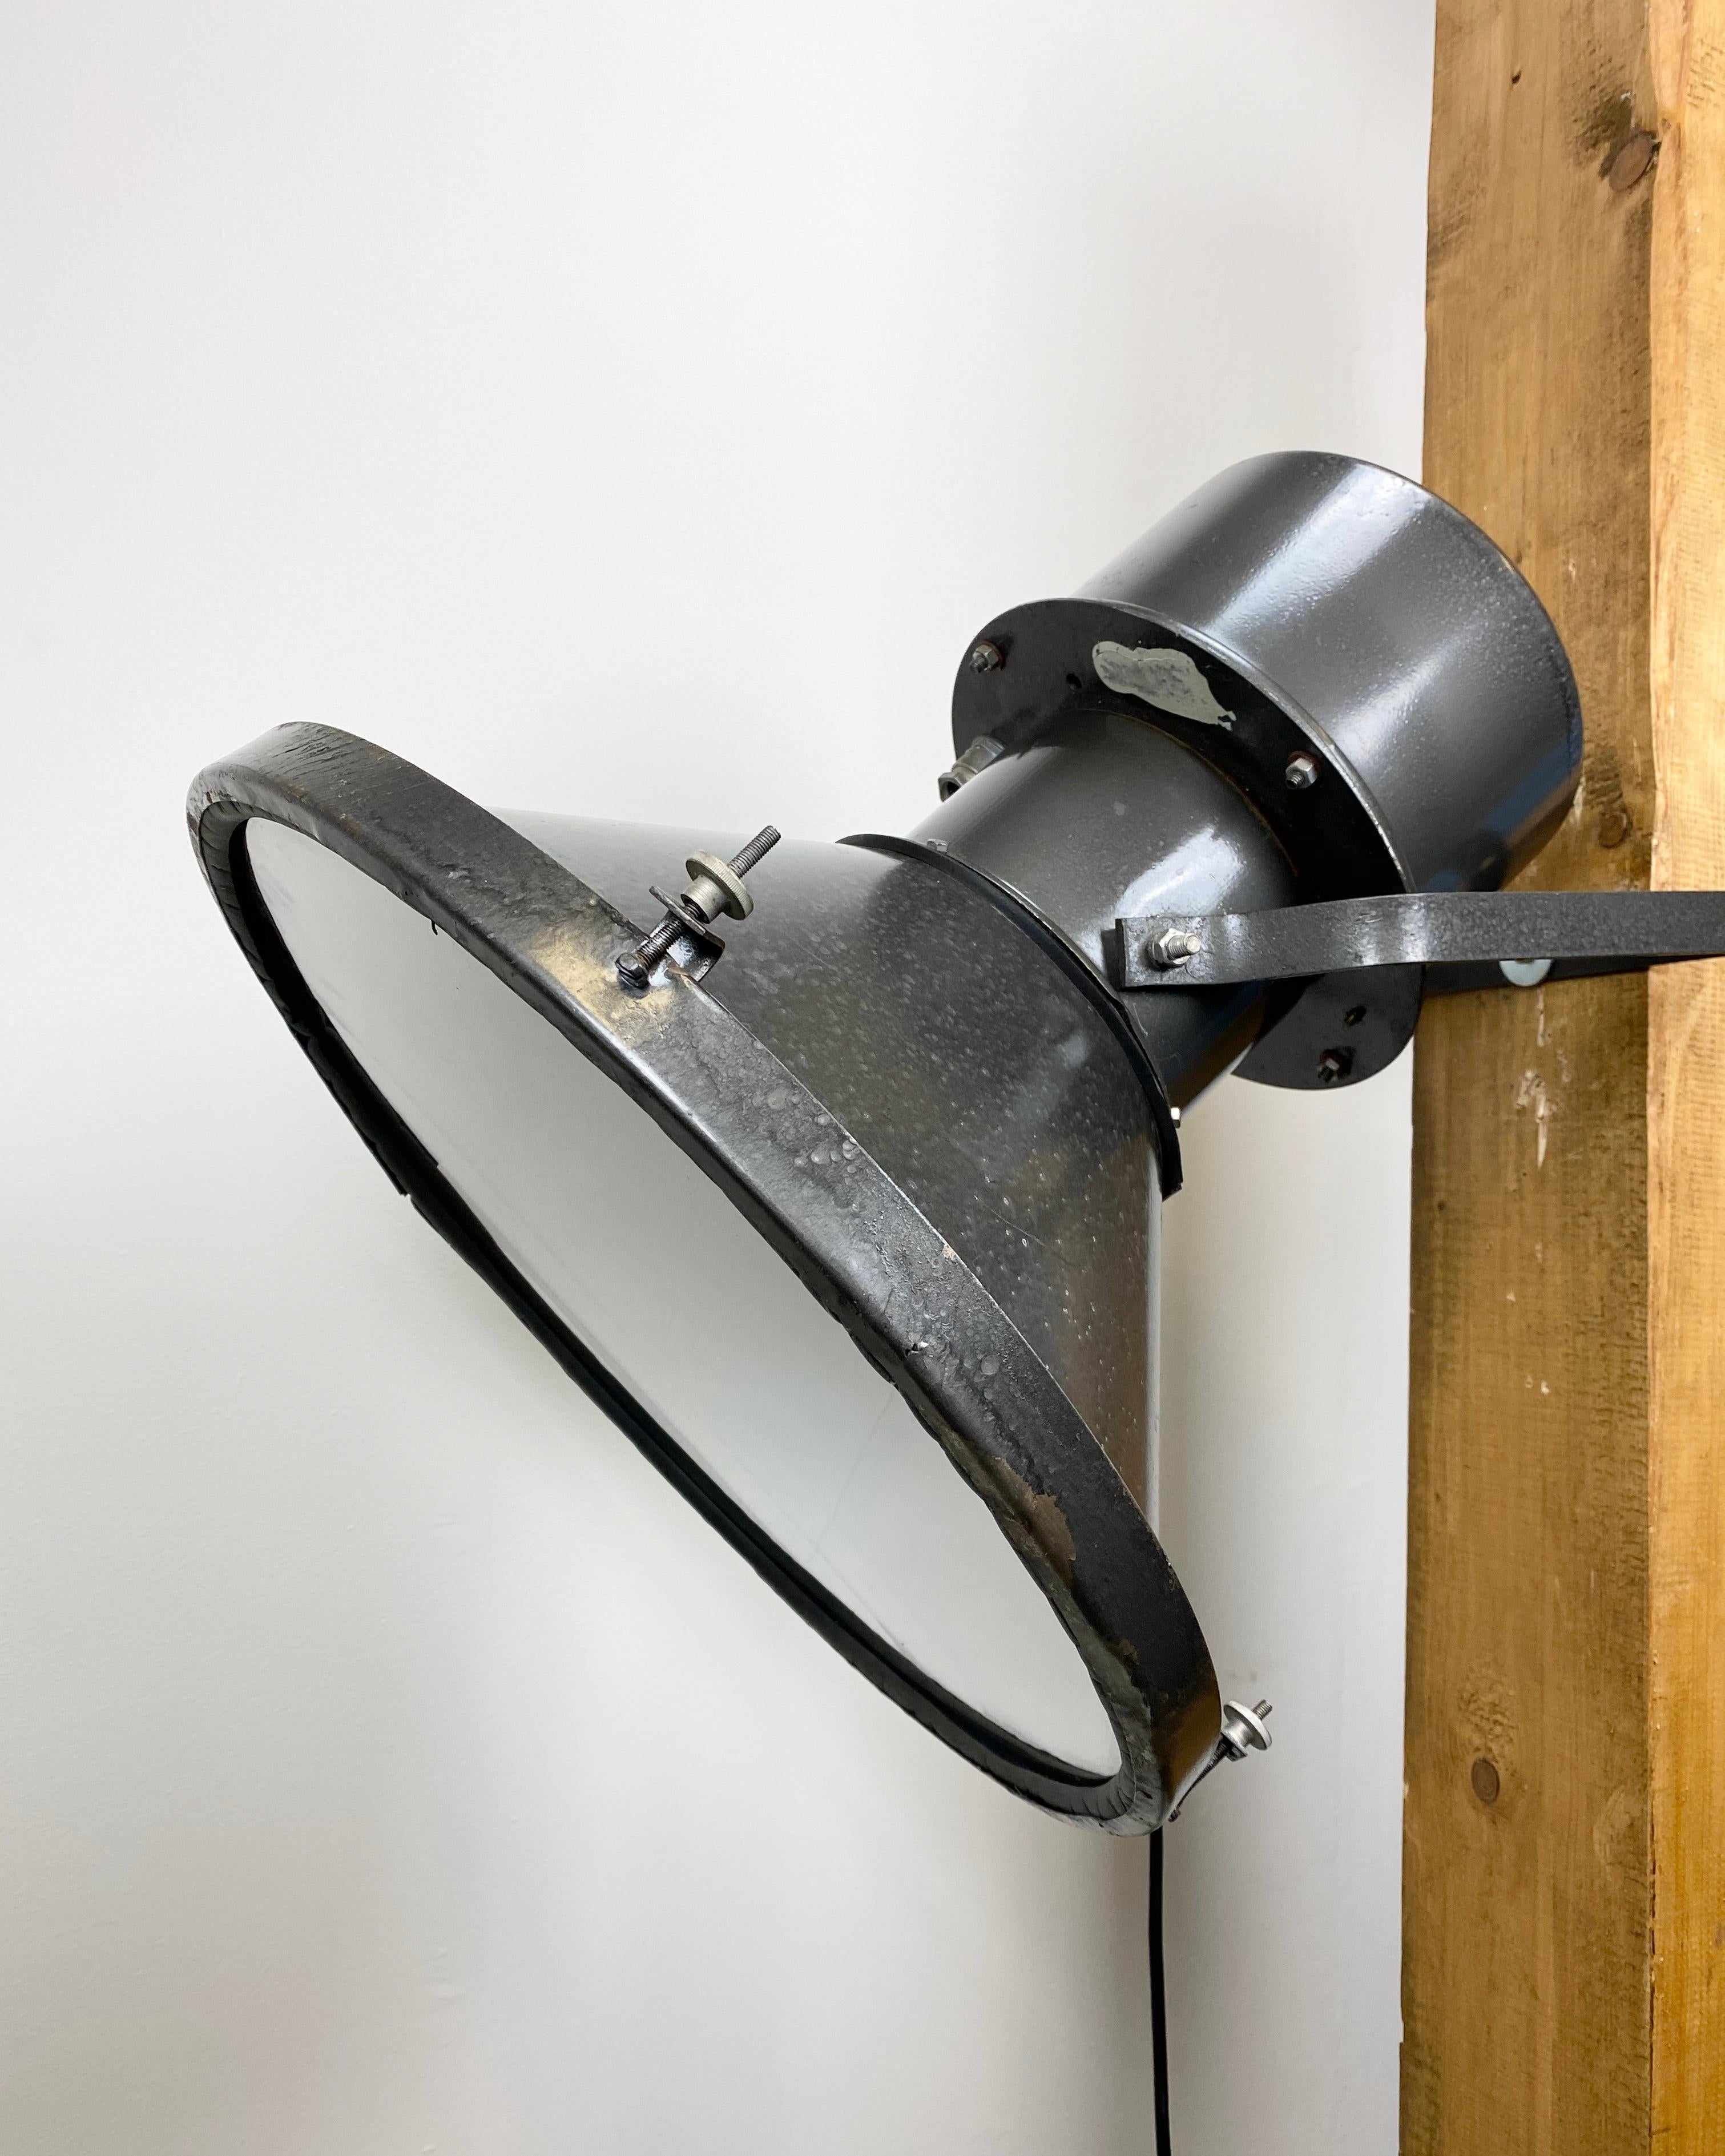 - Vintage factory wall spotlight made in former Czechoslovakia during the 1960s
- It features metal grey hammerpaint body and clear glass cover
- New porcelain socket for E27 lightbulbs and new wire
- The weight of the spotlight is 7 kg
- Fully